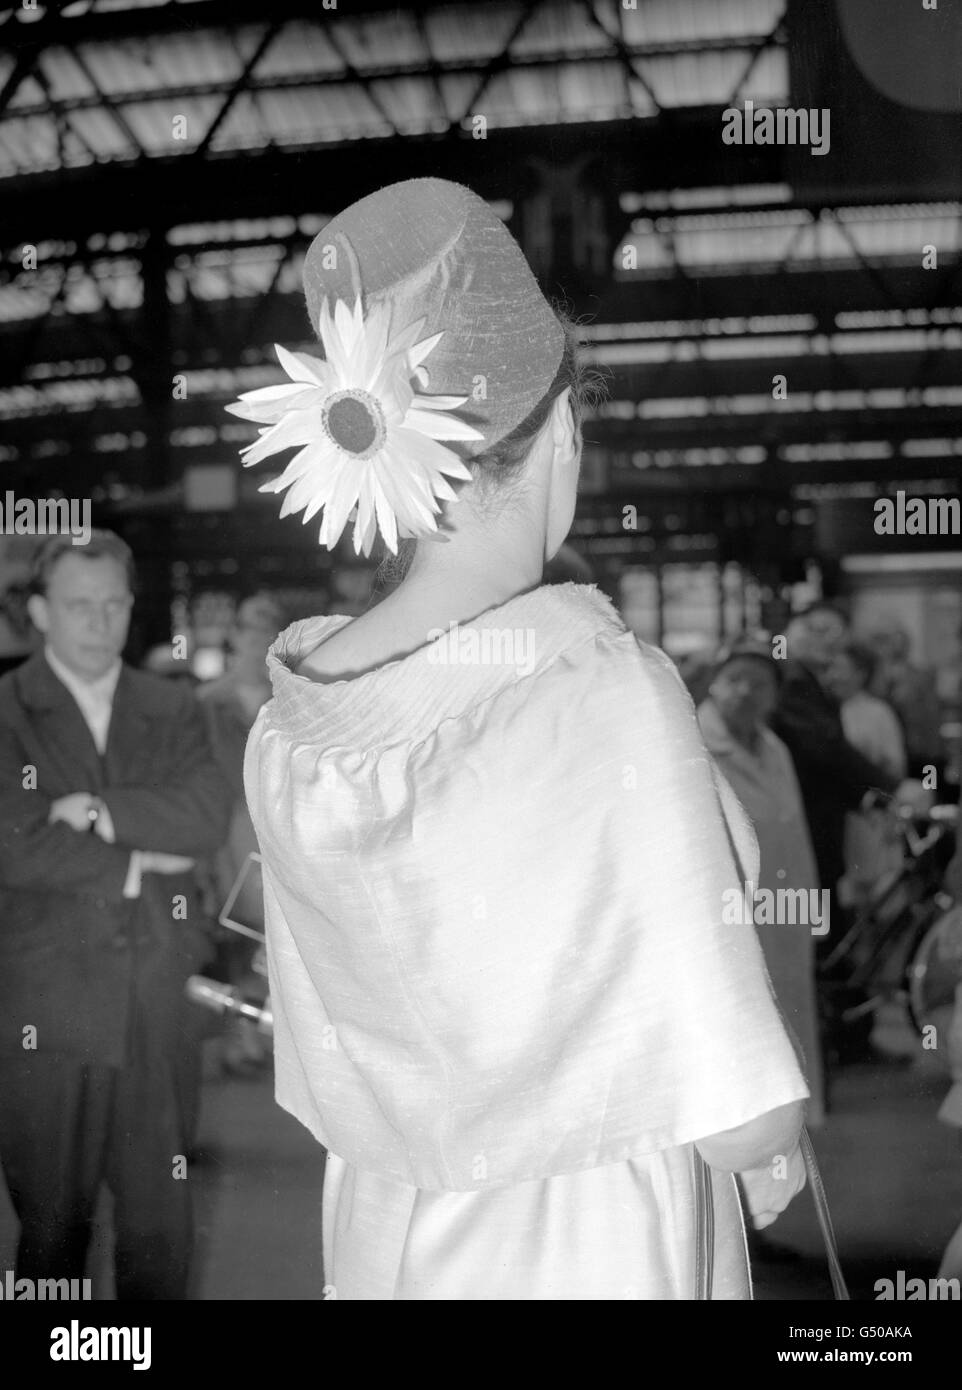 Horse Racing - Royal Ascot - Race Goers at Waterloo Station, London. Mrs. Helen Shaw arrives at London's Waterloo Station before heading off to Royal Ascot Stock Photo